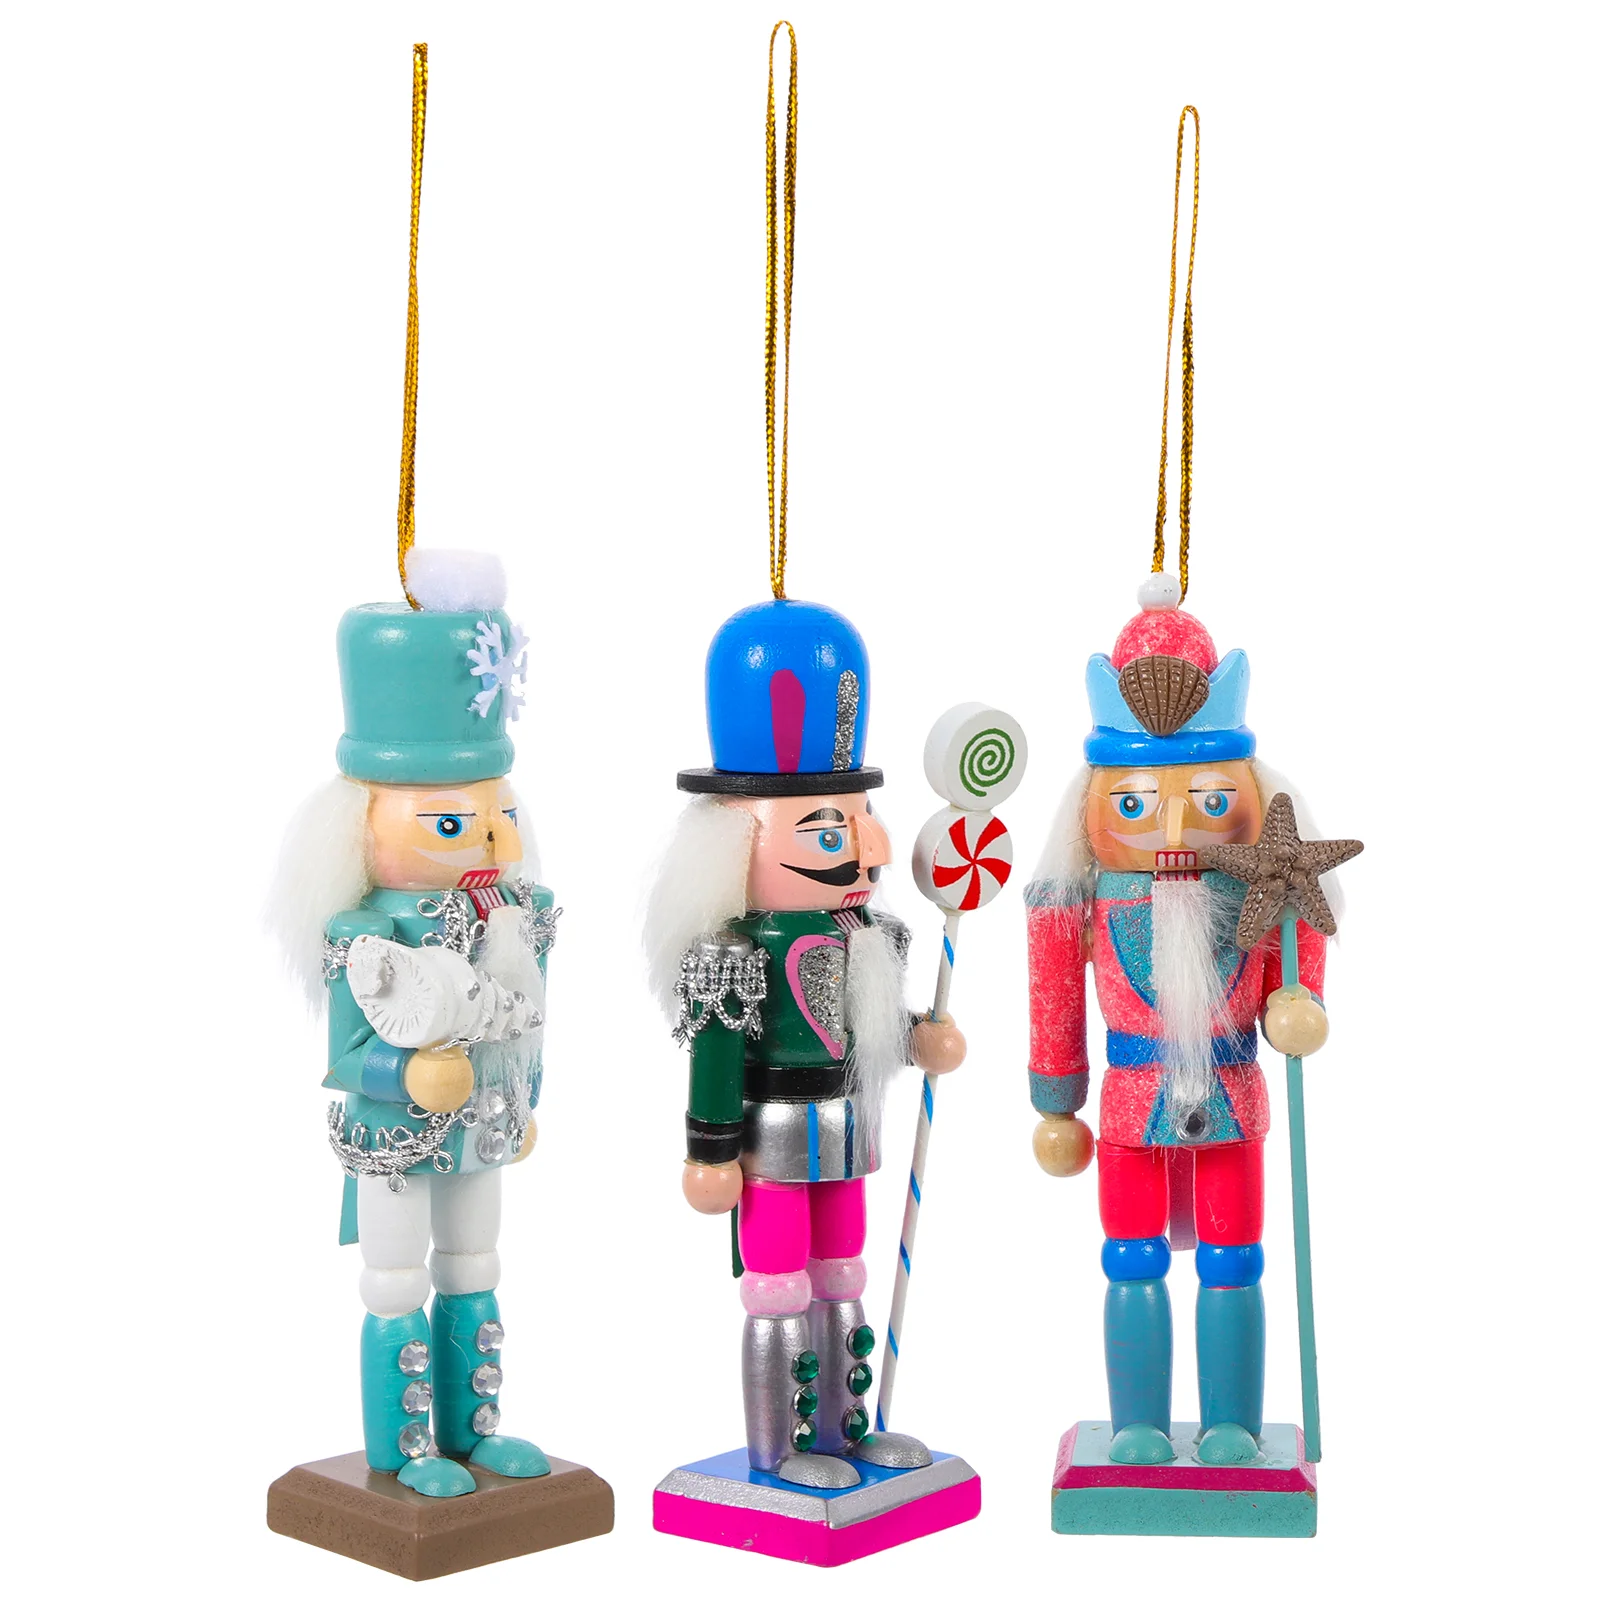 

Nutcracker Soldier Nutcrackers Toy Puppet Nauticaldoll Figures Puppets Statue Themed Figurines Christmas Ocean Ornaments Wooden